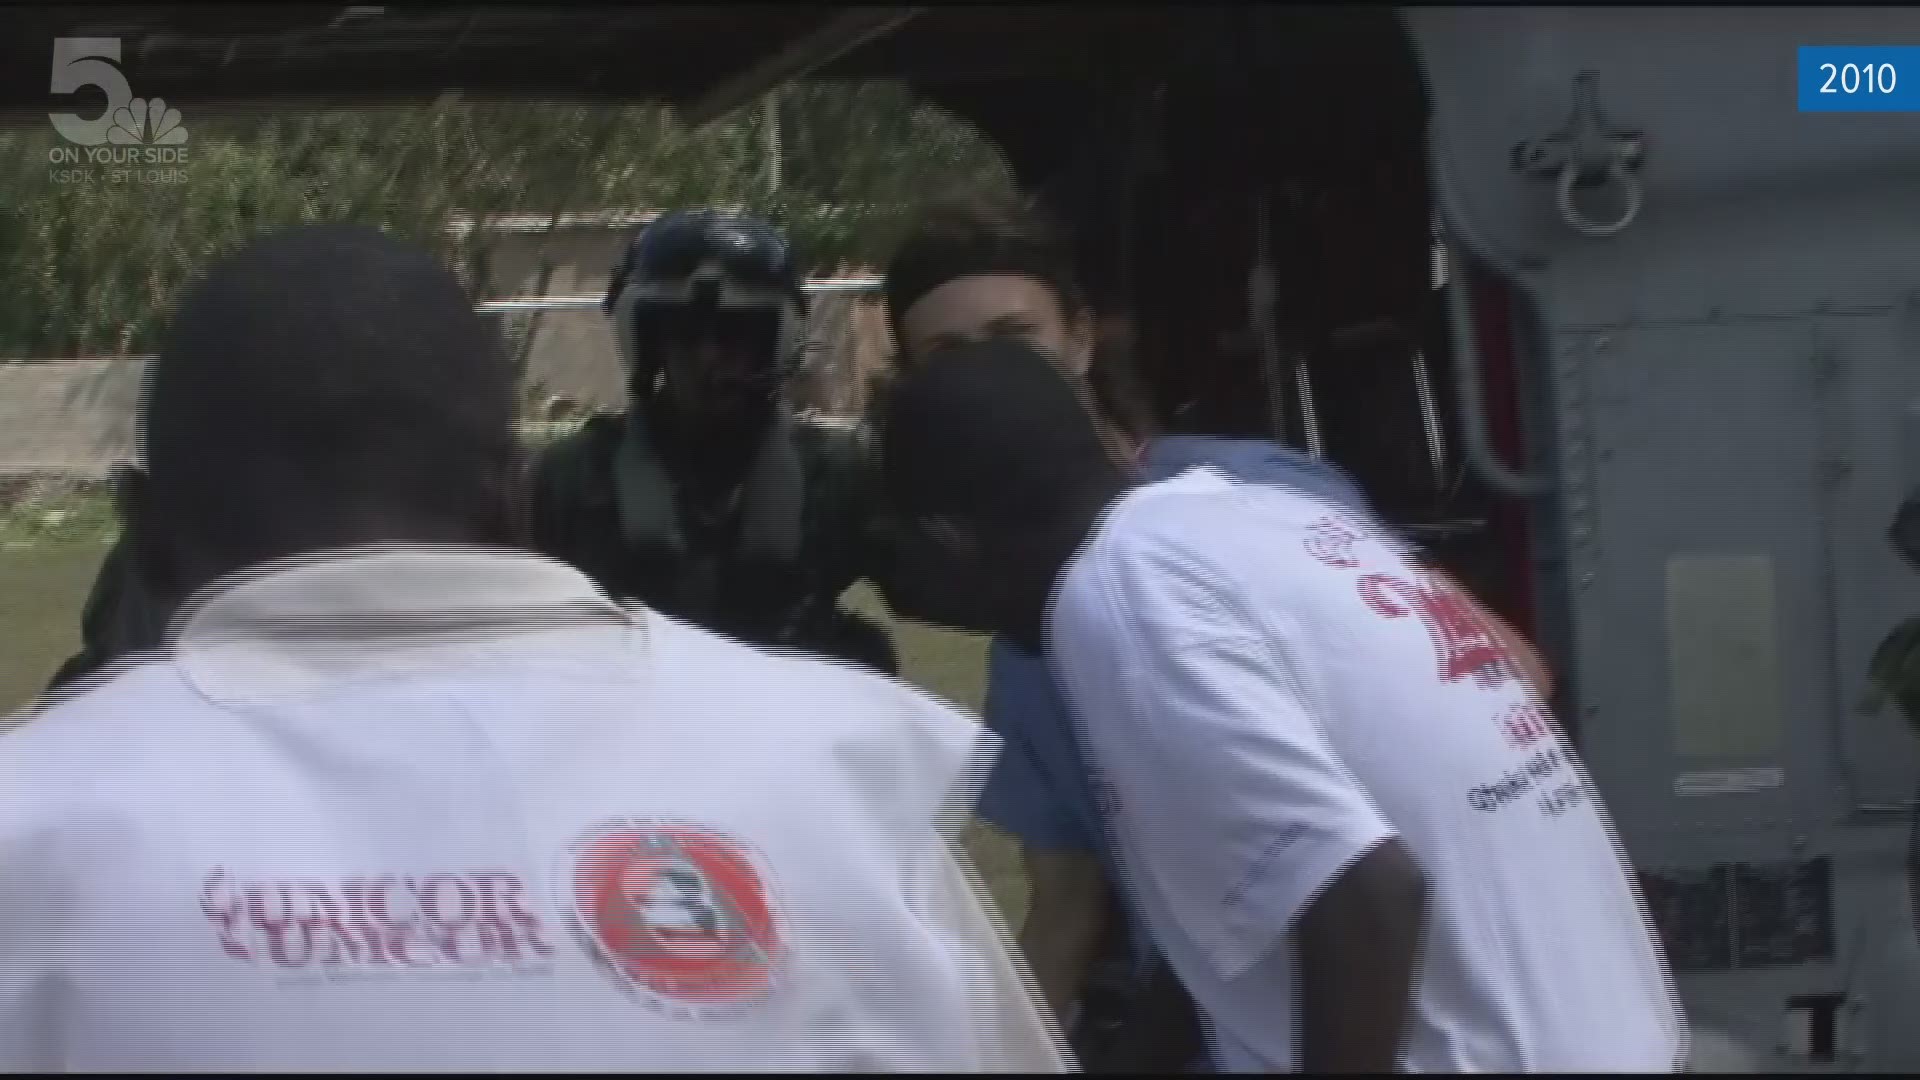 In this file package from 2010, 5 On Your Side’s Casey Nolen goes to Haiti where St. Louisans were helping those who were injured and lost everything.